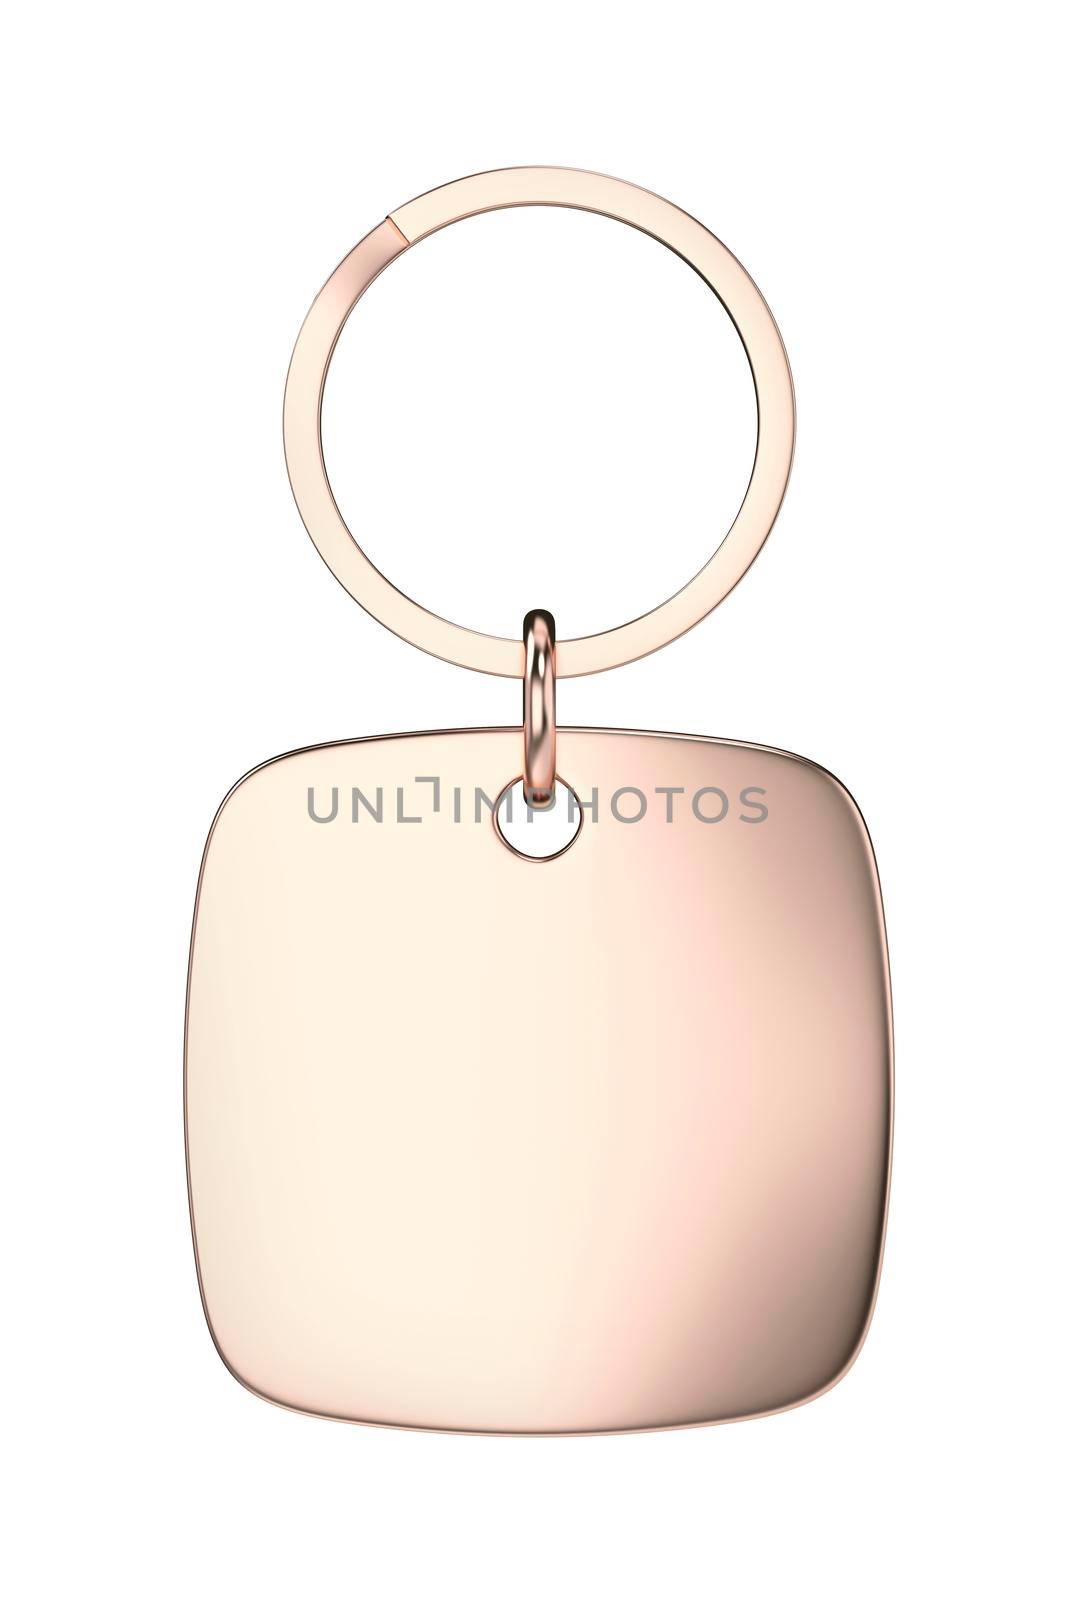 Square rose gold keychain by magraphics